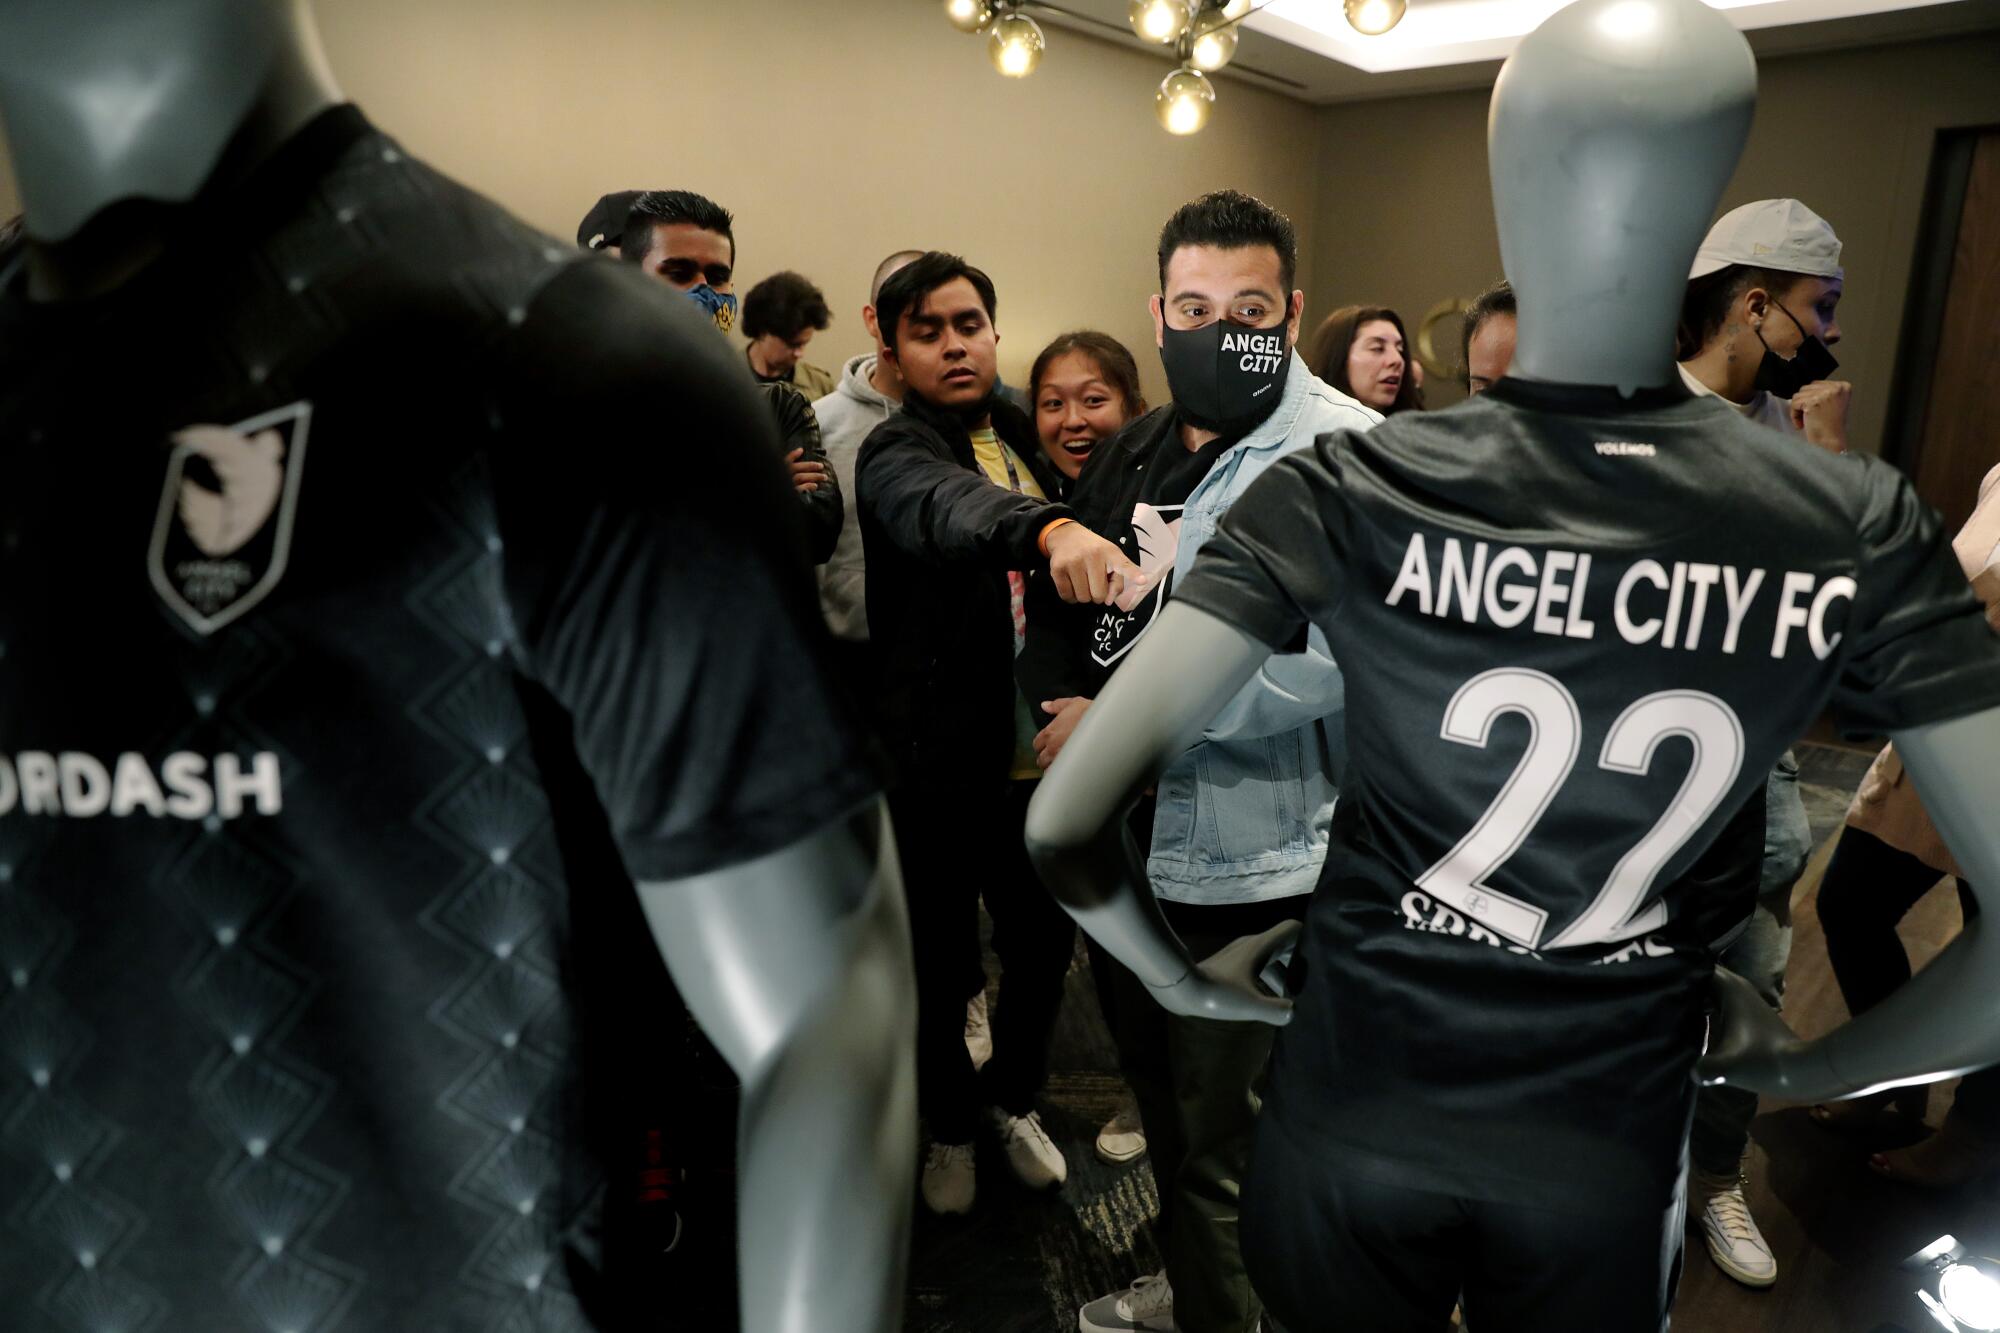 People point to the Angel City FC jersey at an unveiling event